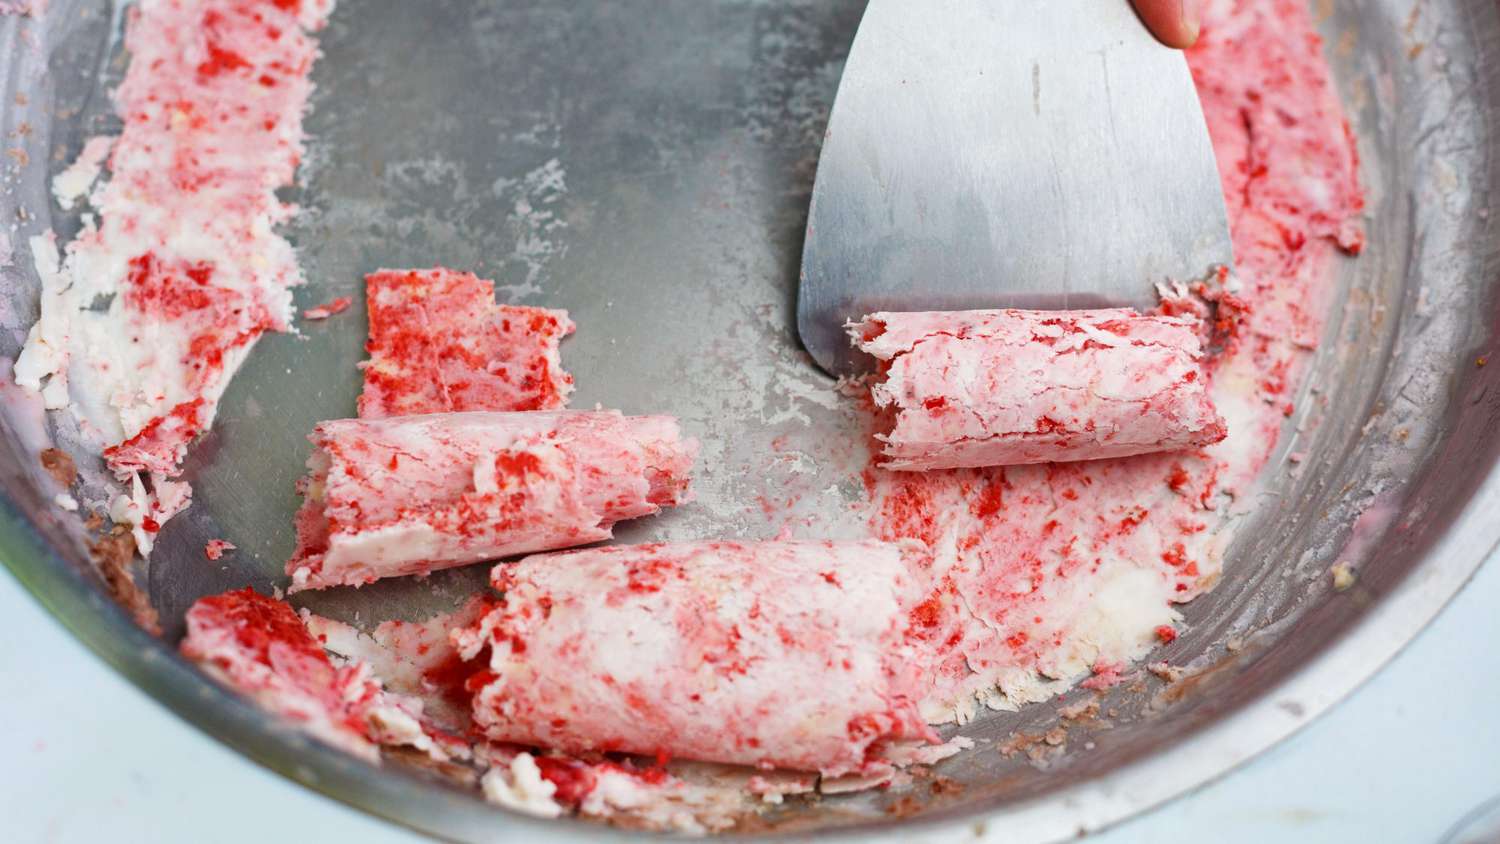 How To Make Rolled Ice Cream at Home